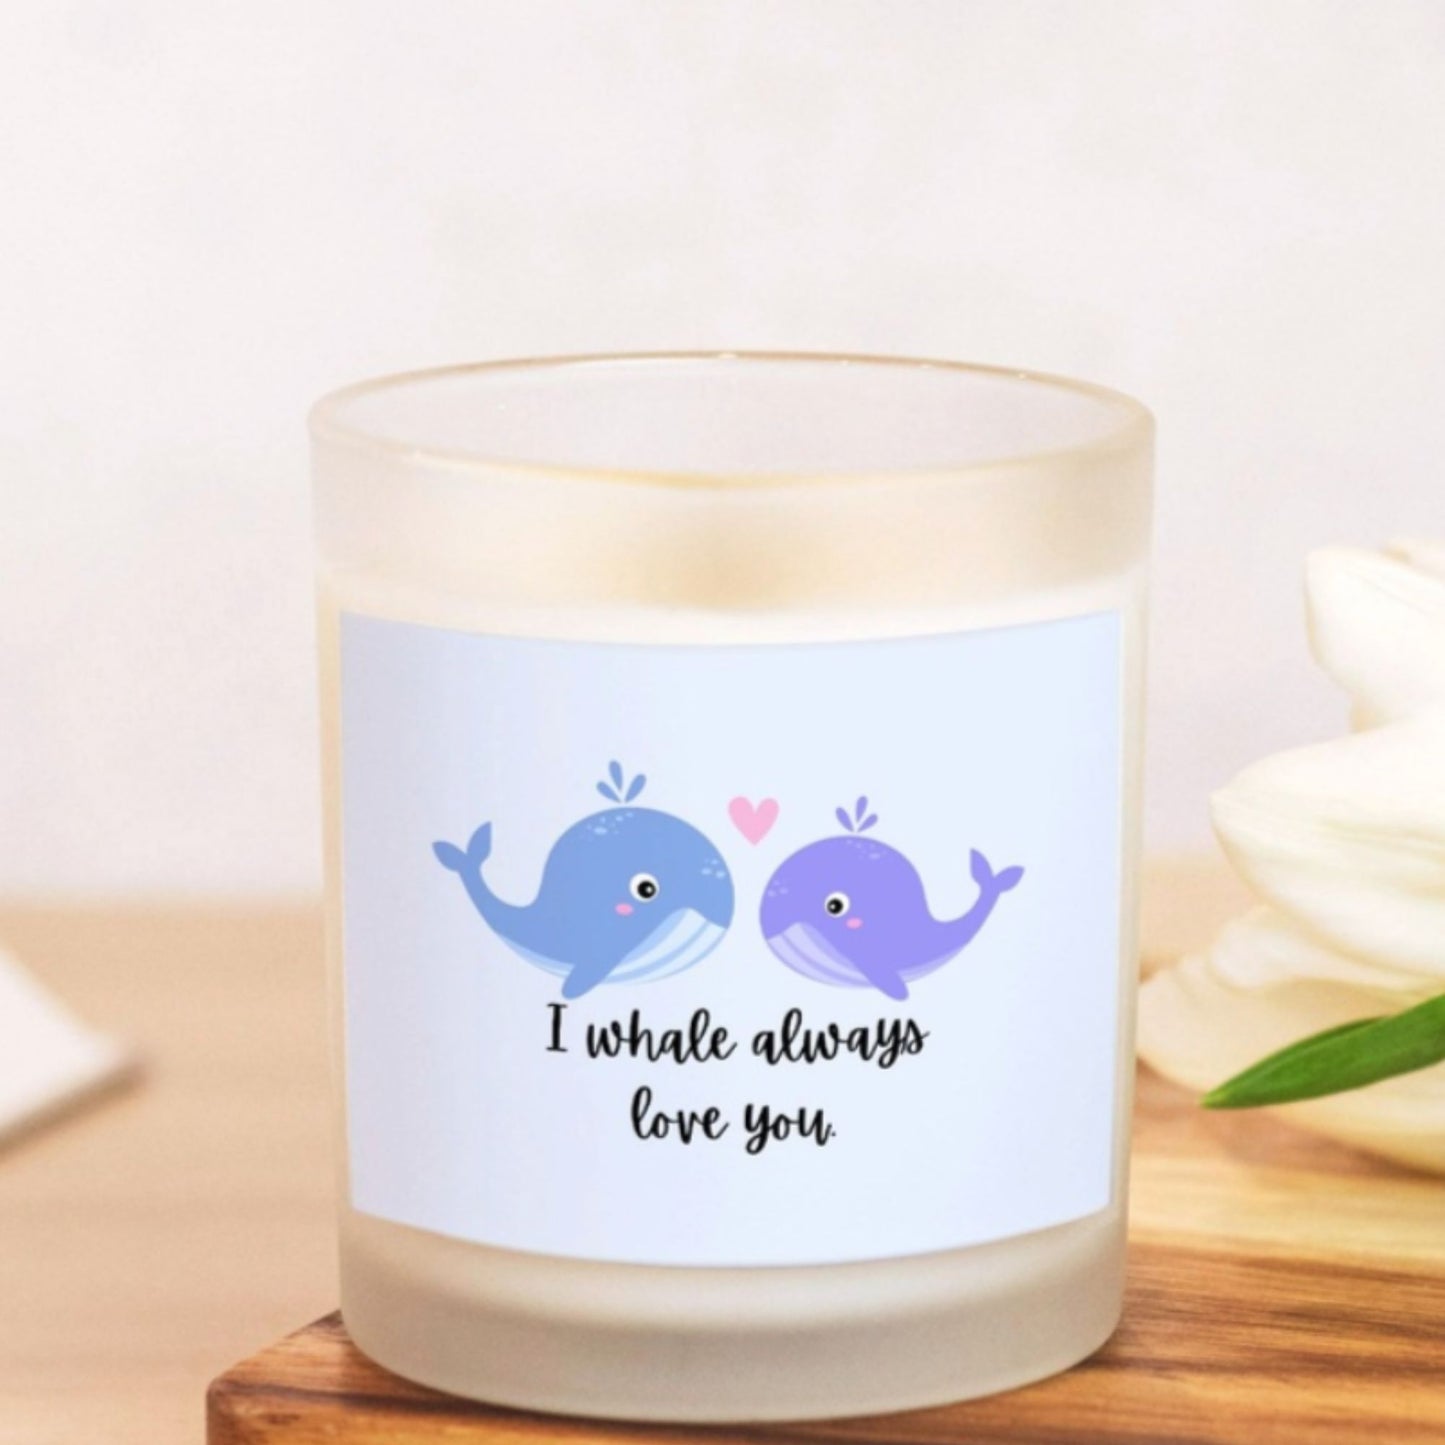 I Whale Always Love You Candle Premium Non-Toxic Wood Wick Candle Frosted Glass (Hand Poured 11 oz)